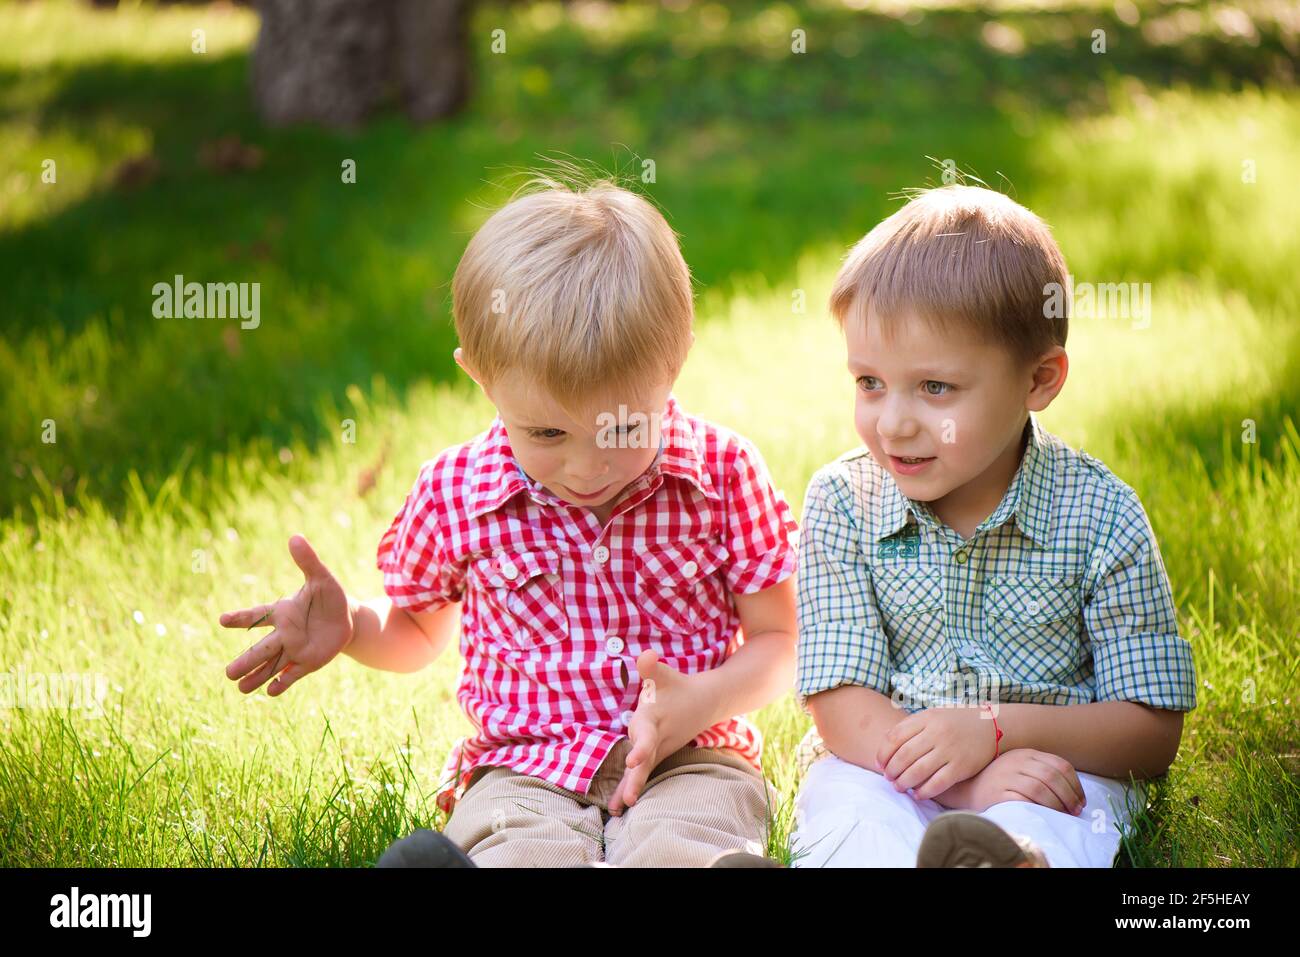 These two boys are best friends. Friends for life Stock Photo - Alamy